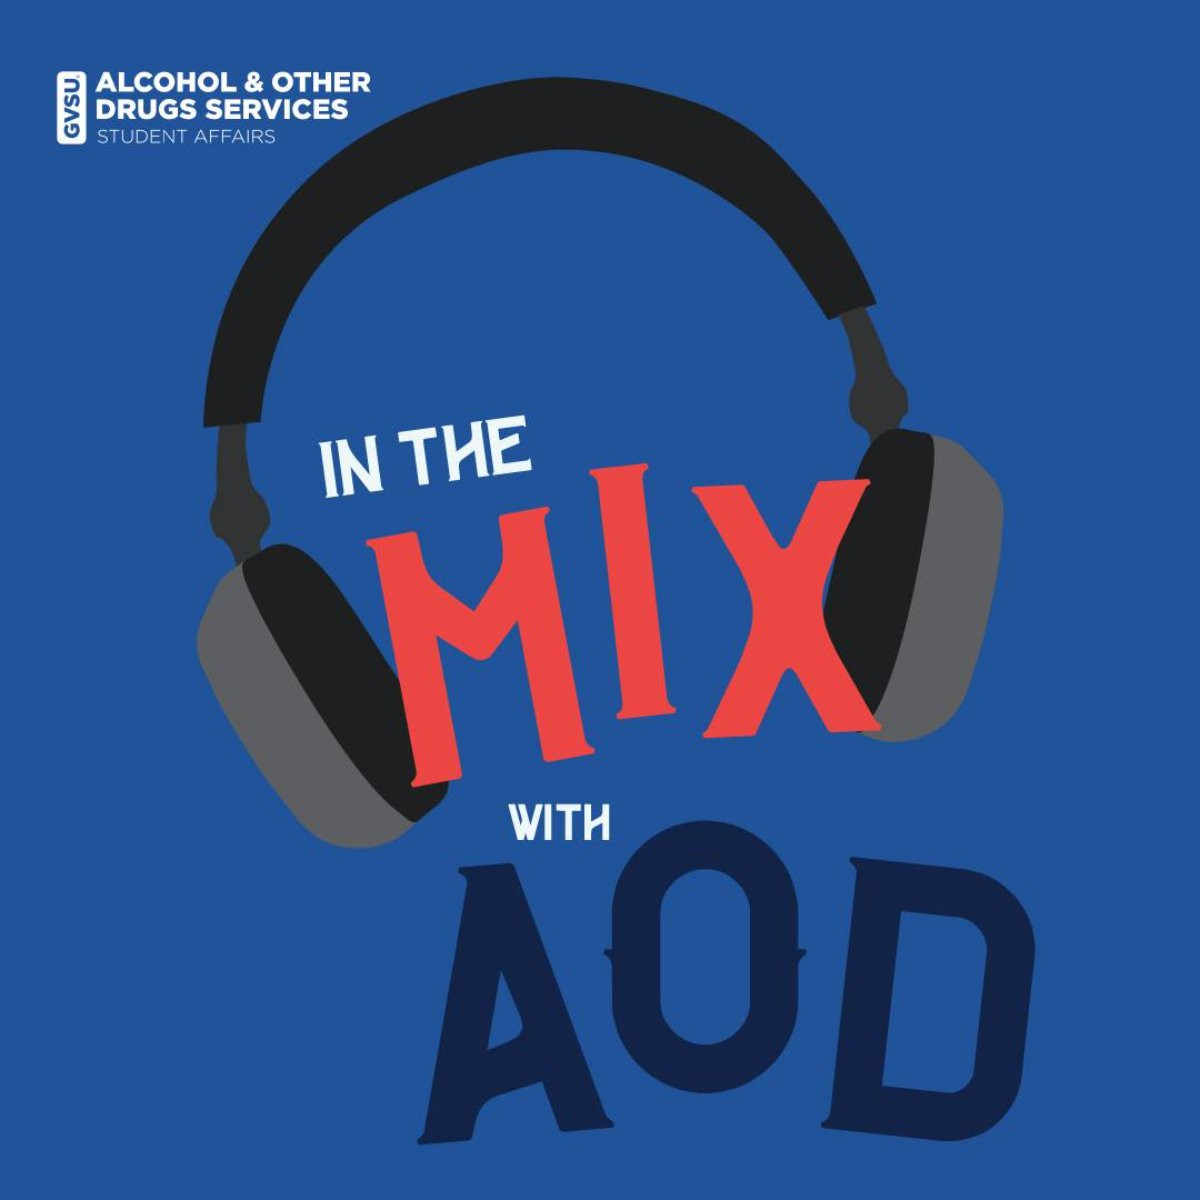 In the Mix with AOD